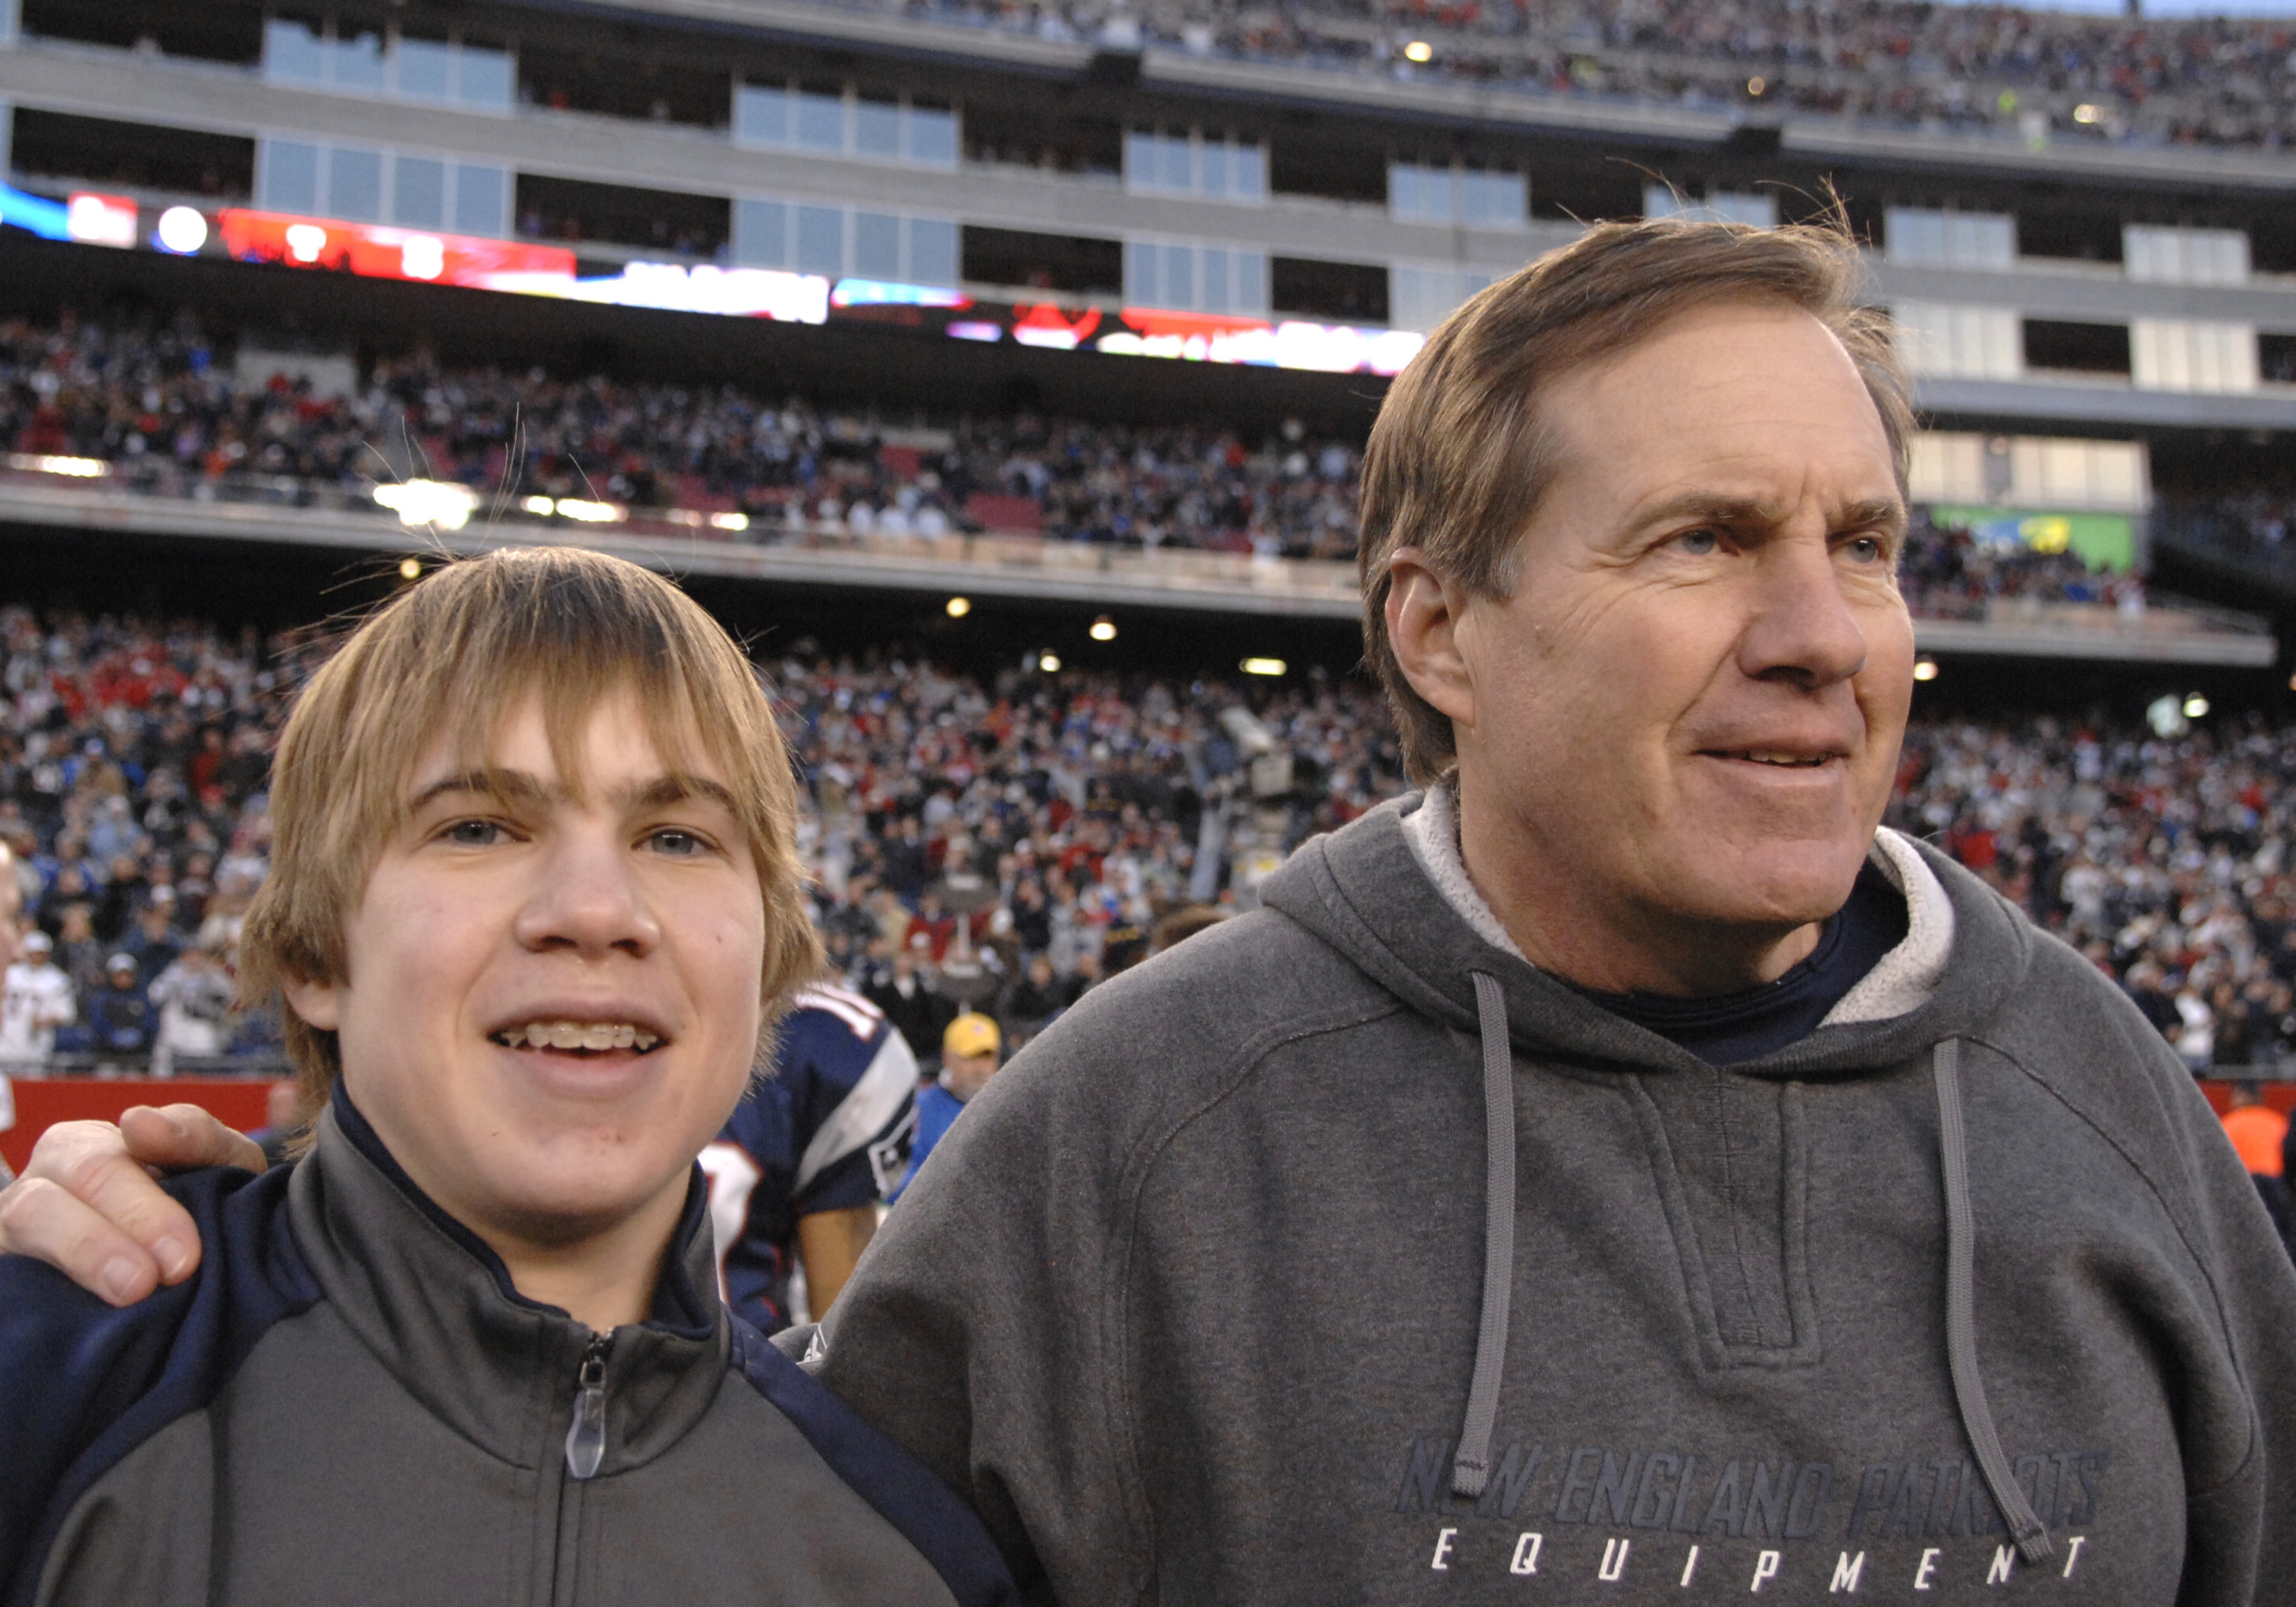 bill belichick girlfriend, linda holliday, pictures, family photos, son, daughter, wife